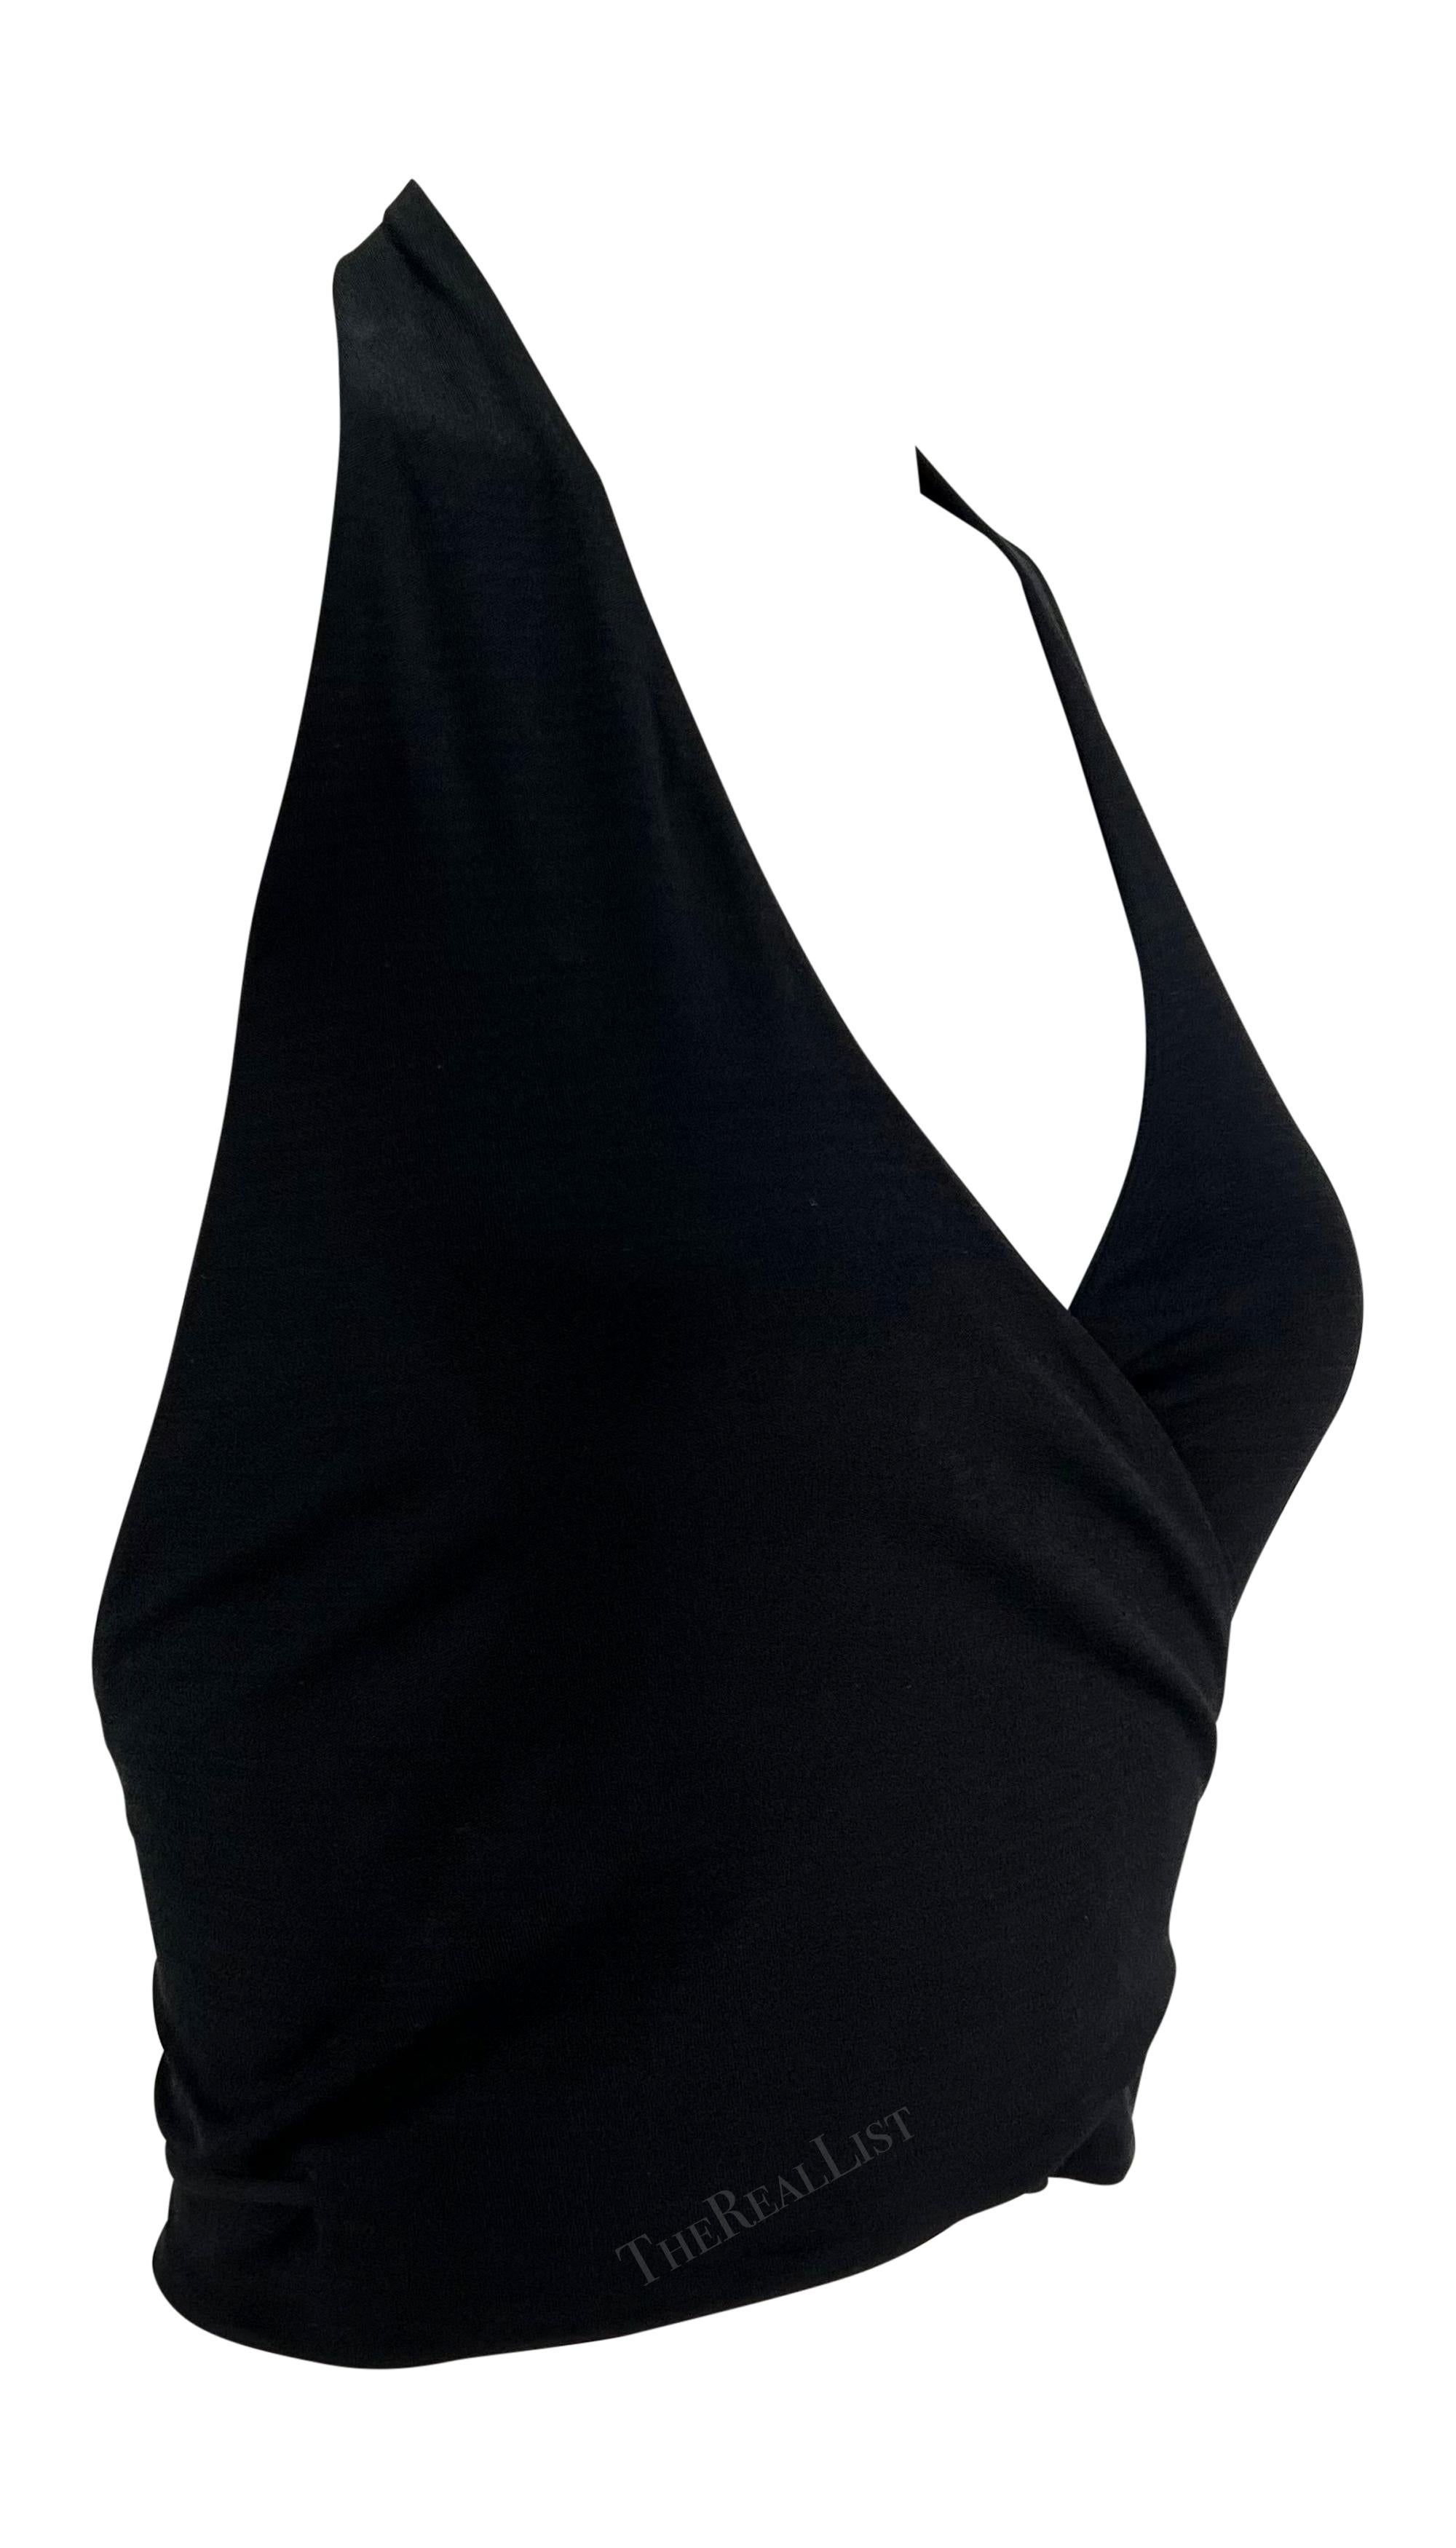 S/S 1997 Gucci by Tom Ford Black Silk Backless Wrap Halter Neck Wrap Top In Excellent Condition For Sale In West Hollywood, CA